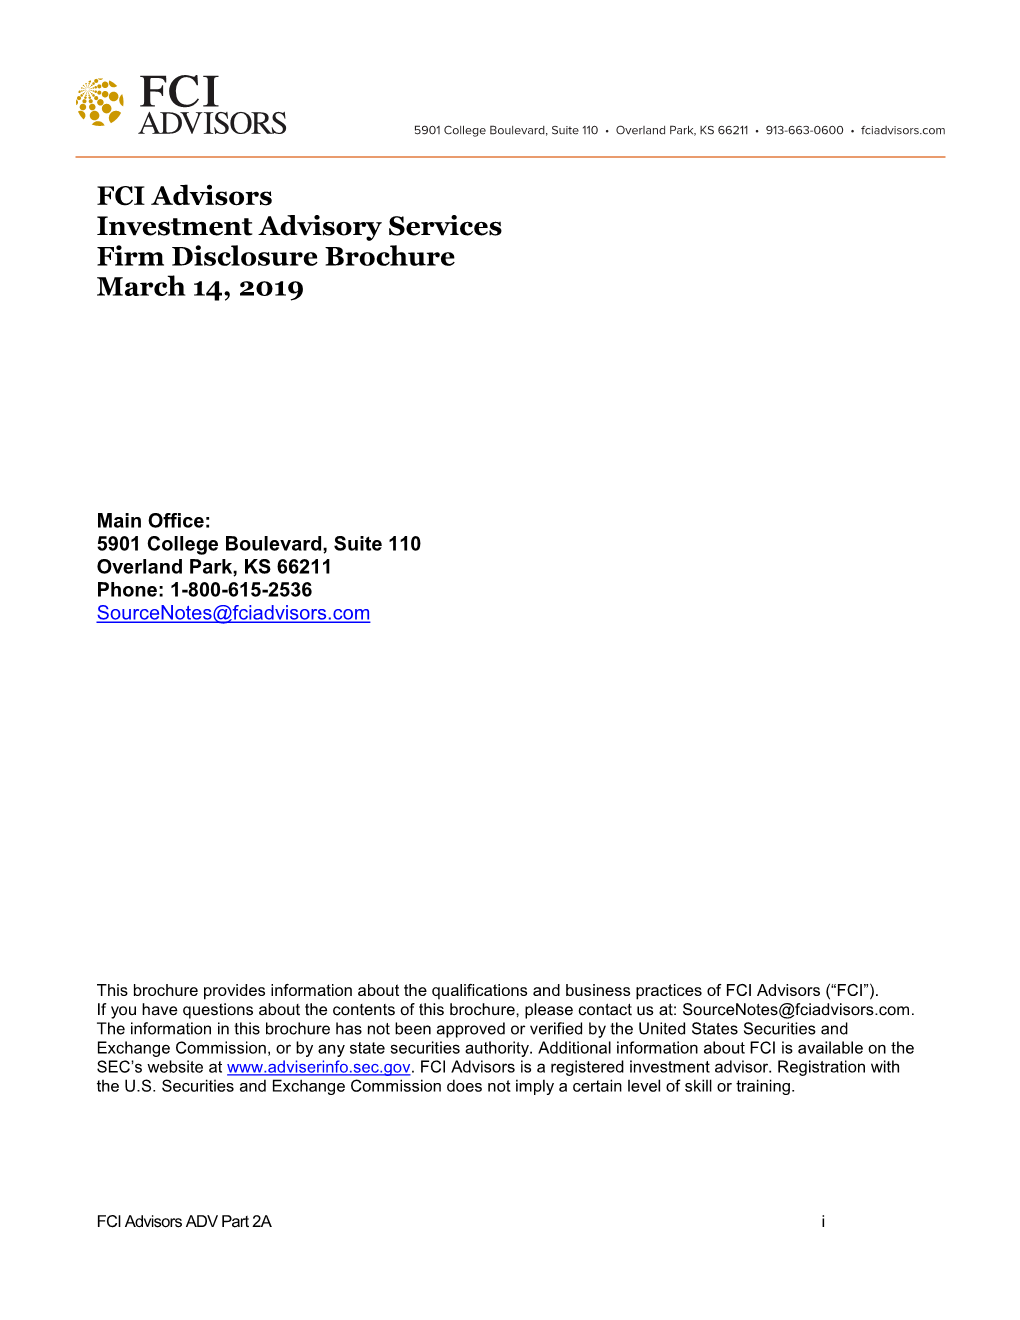 FCI Advisors Investment Advisory Services Firm Disclosure Brochure March 14, 2019